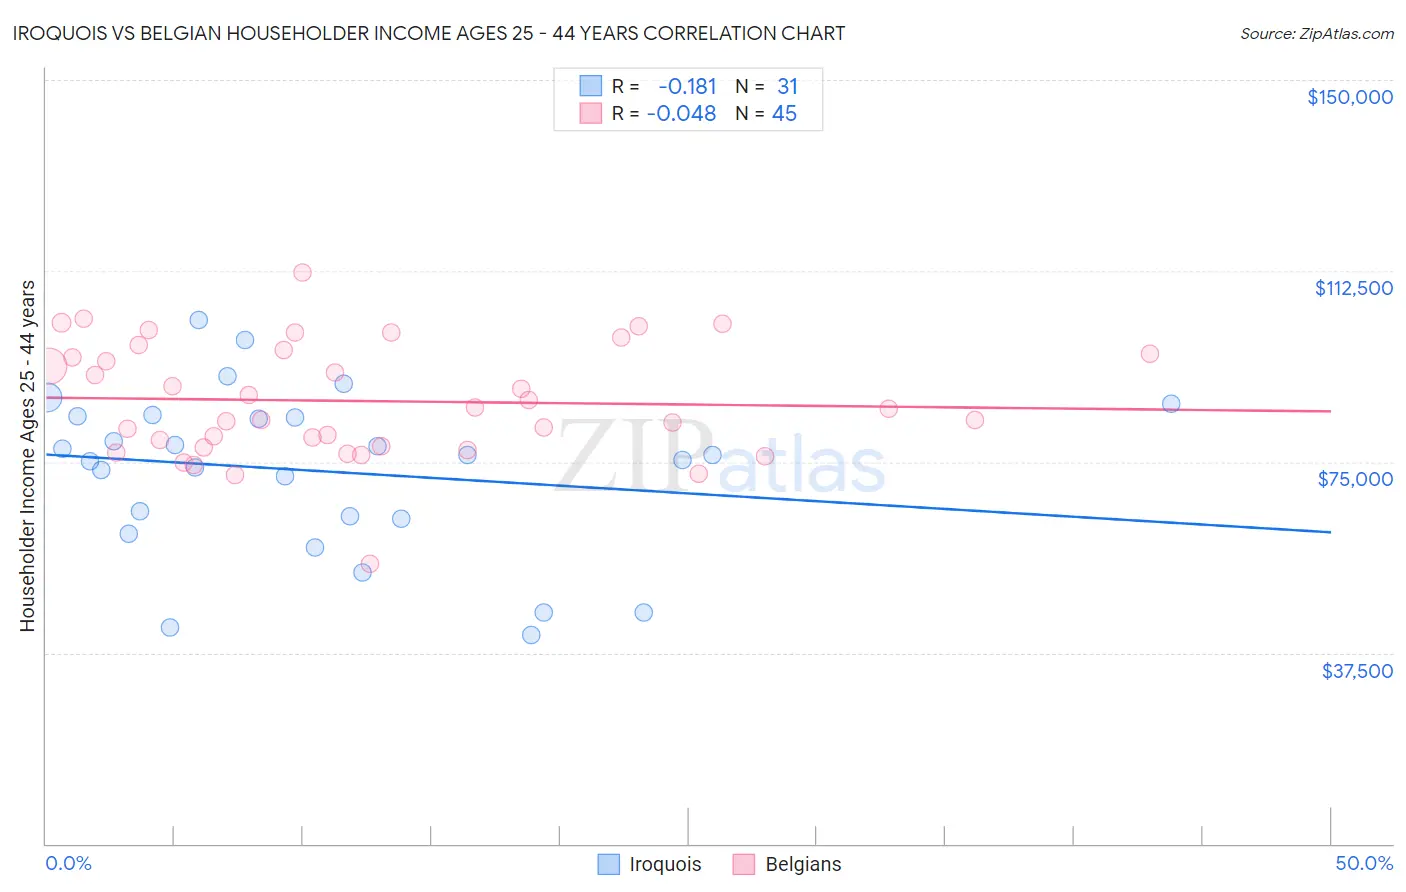 Iroquois vs Belgian Householder Income Ages 25 - 44 years